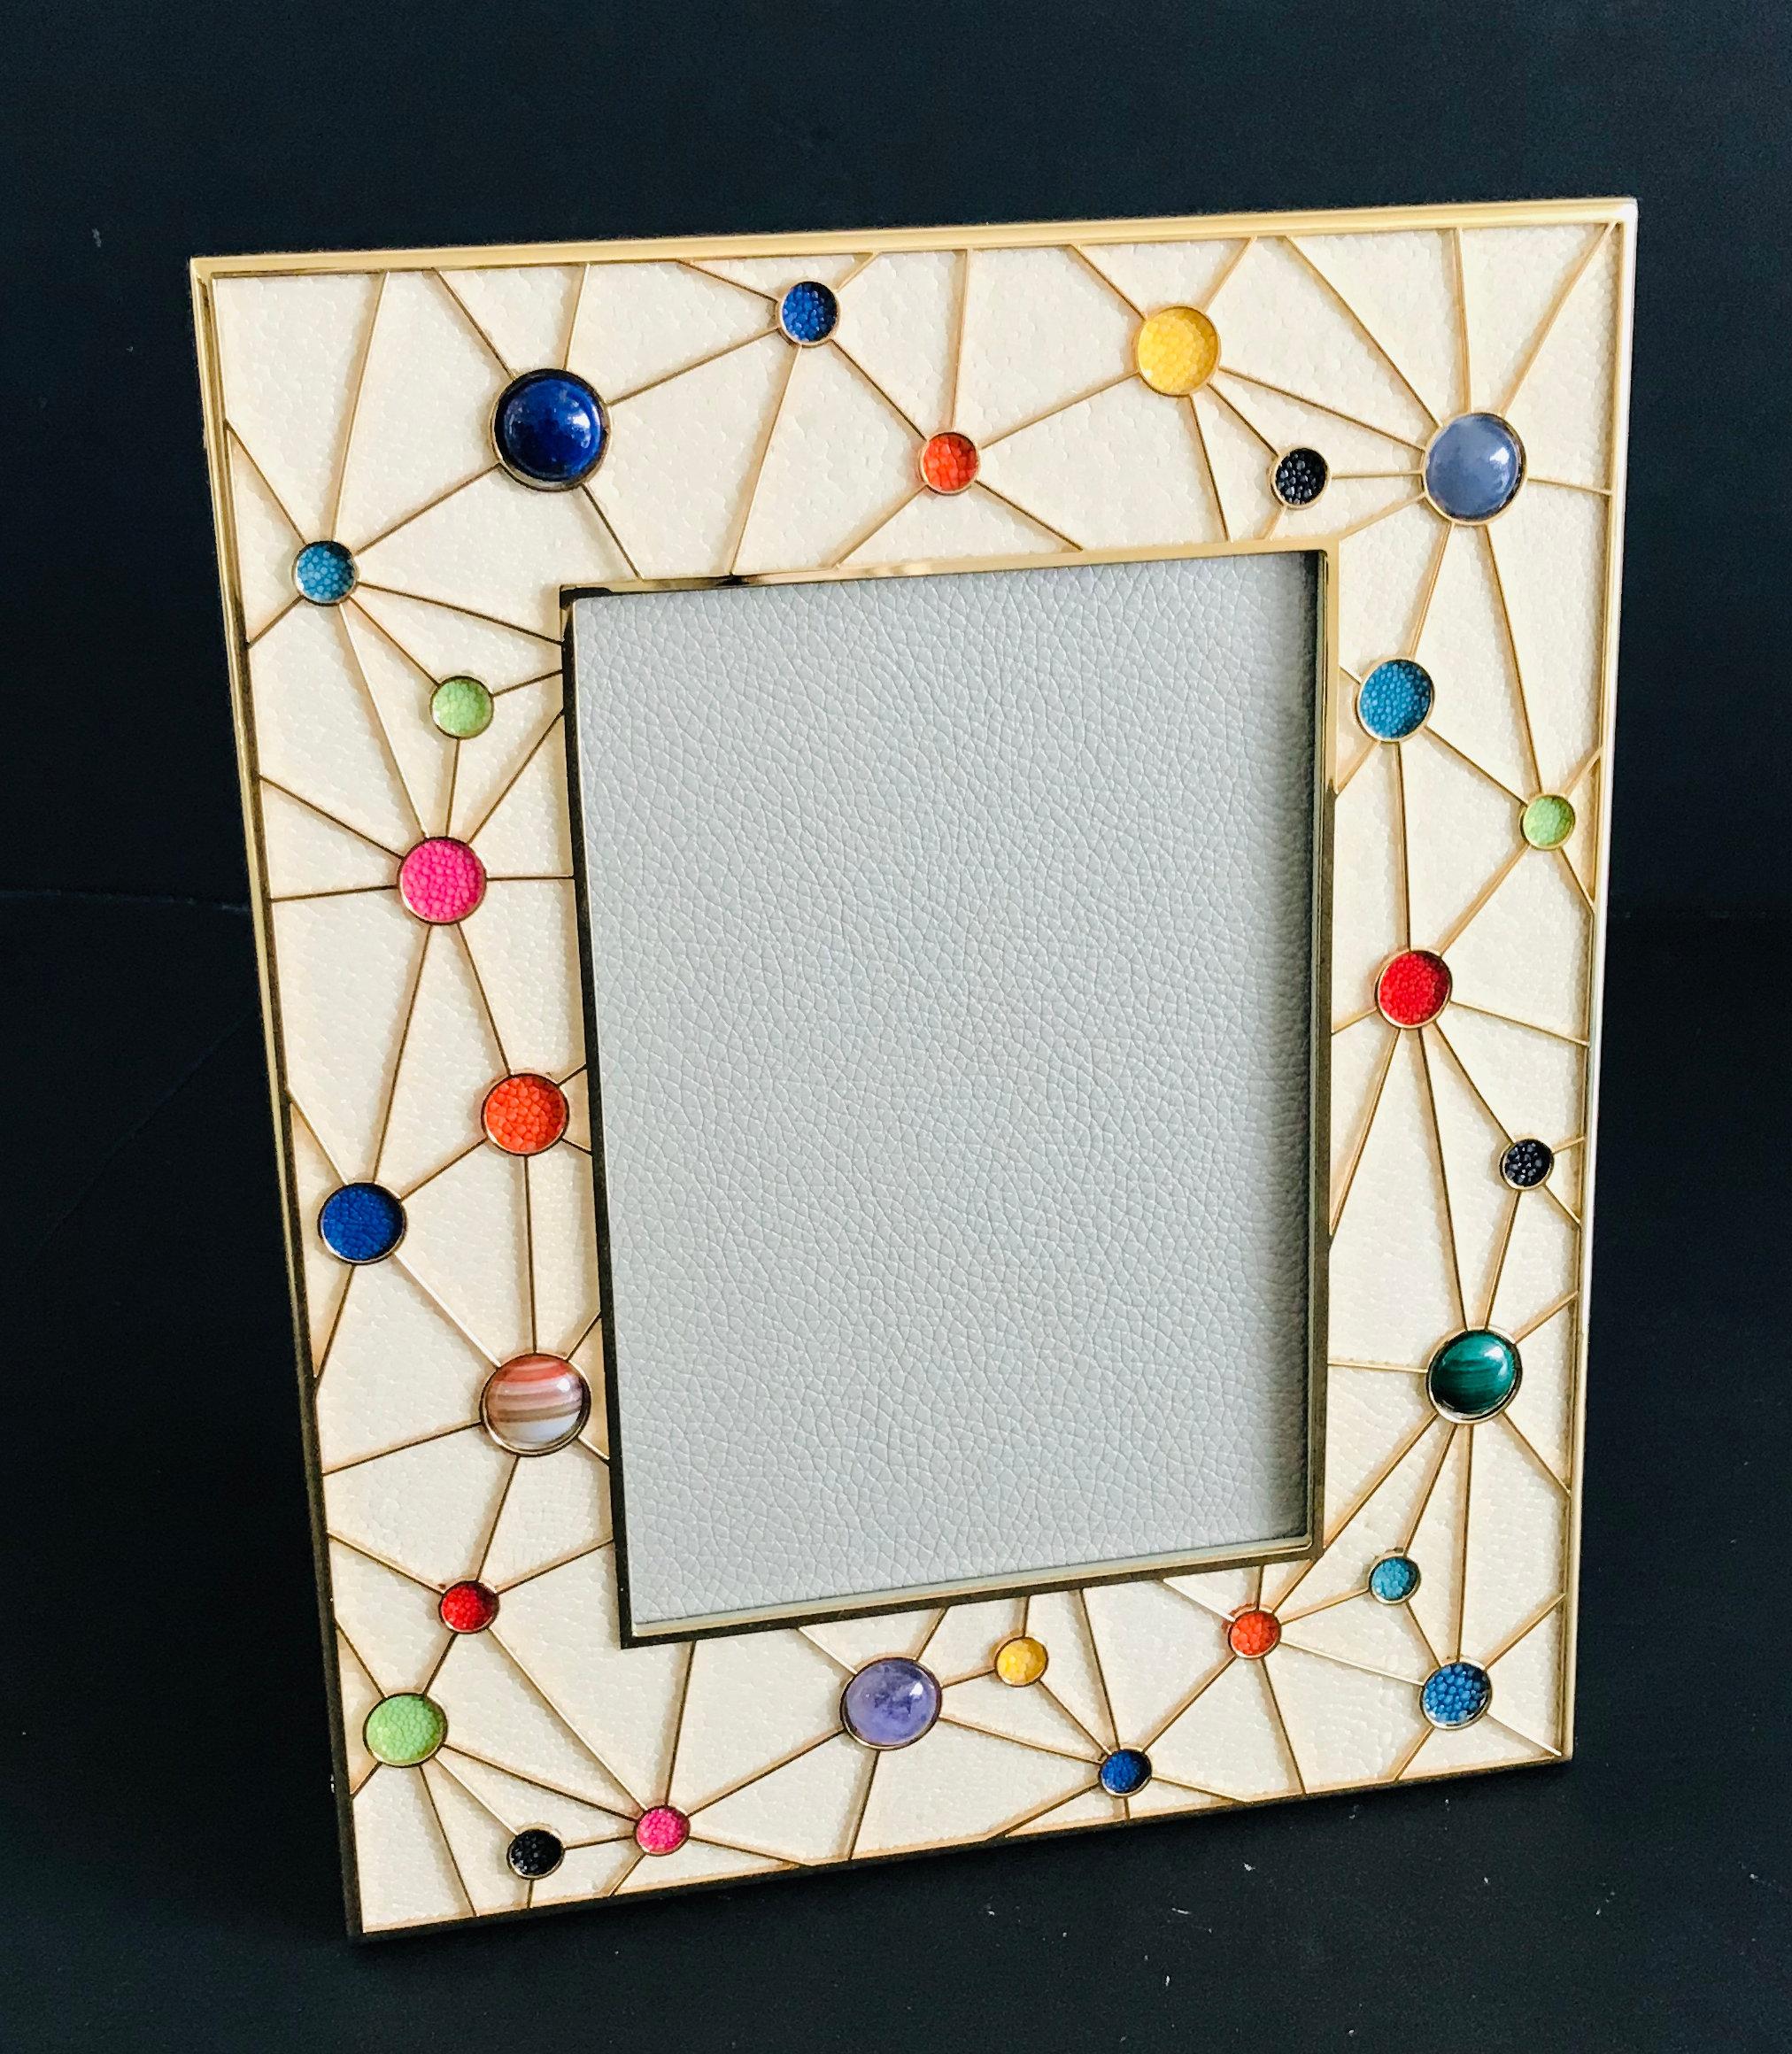 Ivory shagreen with multi-color stones and gold-plated picture frame by Fabio Ltd
Height: 10.5 inches / Width: 8.5 inches / Depth: 1 inch
Photo size: 5 inches by 7 inches
1 in stock in Palm Springs
Order Reference #: FABIOLTD PF41
This piece makes